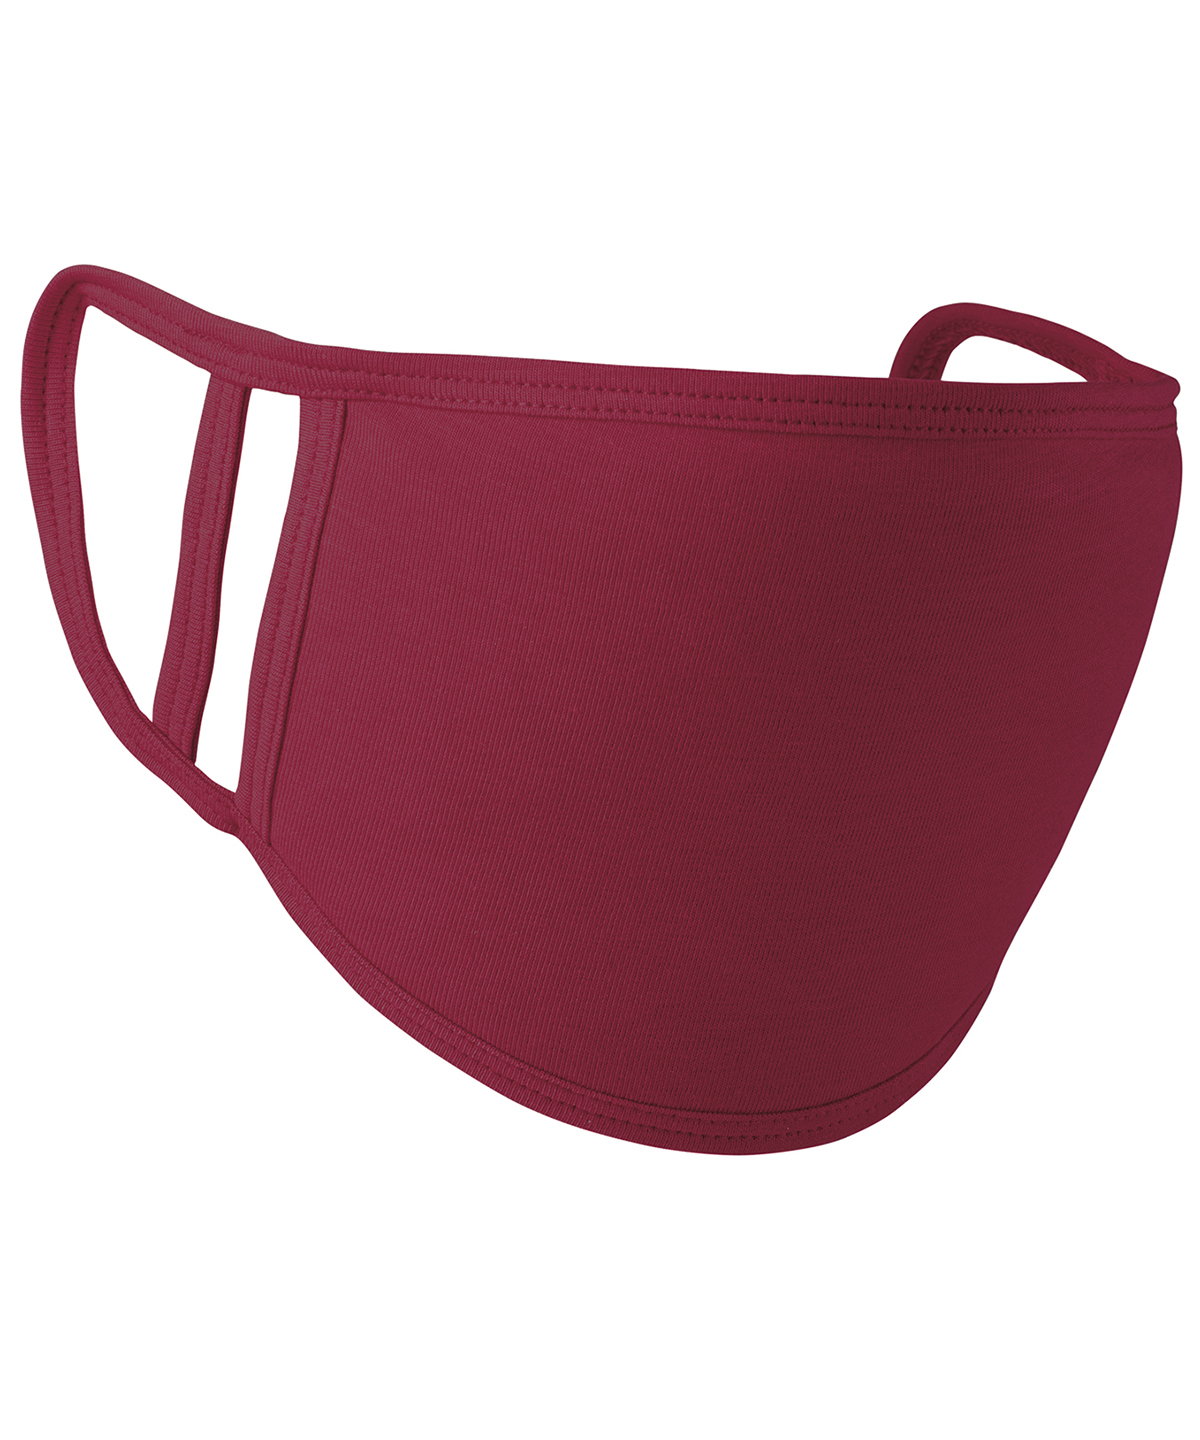 Washable 2-ply Face Covering in burgundy